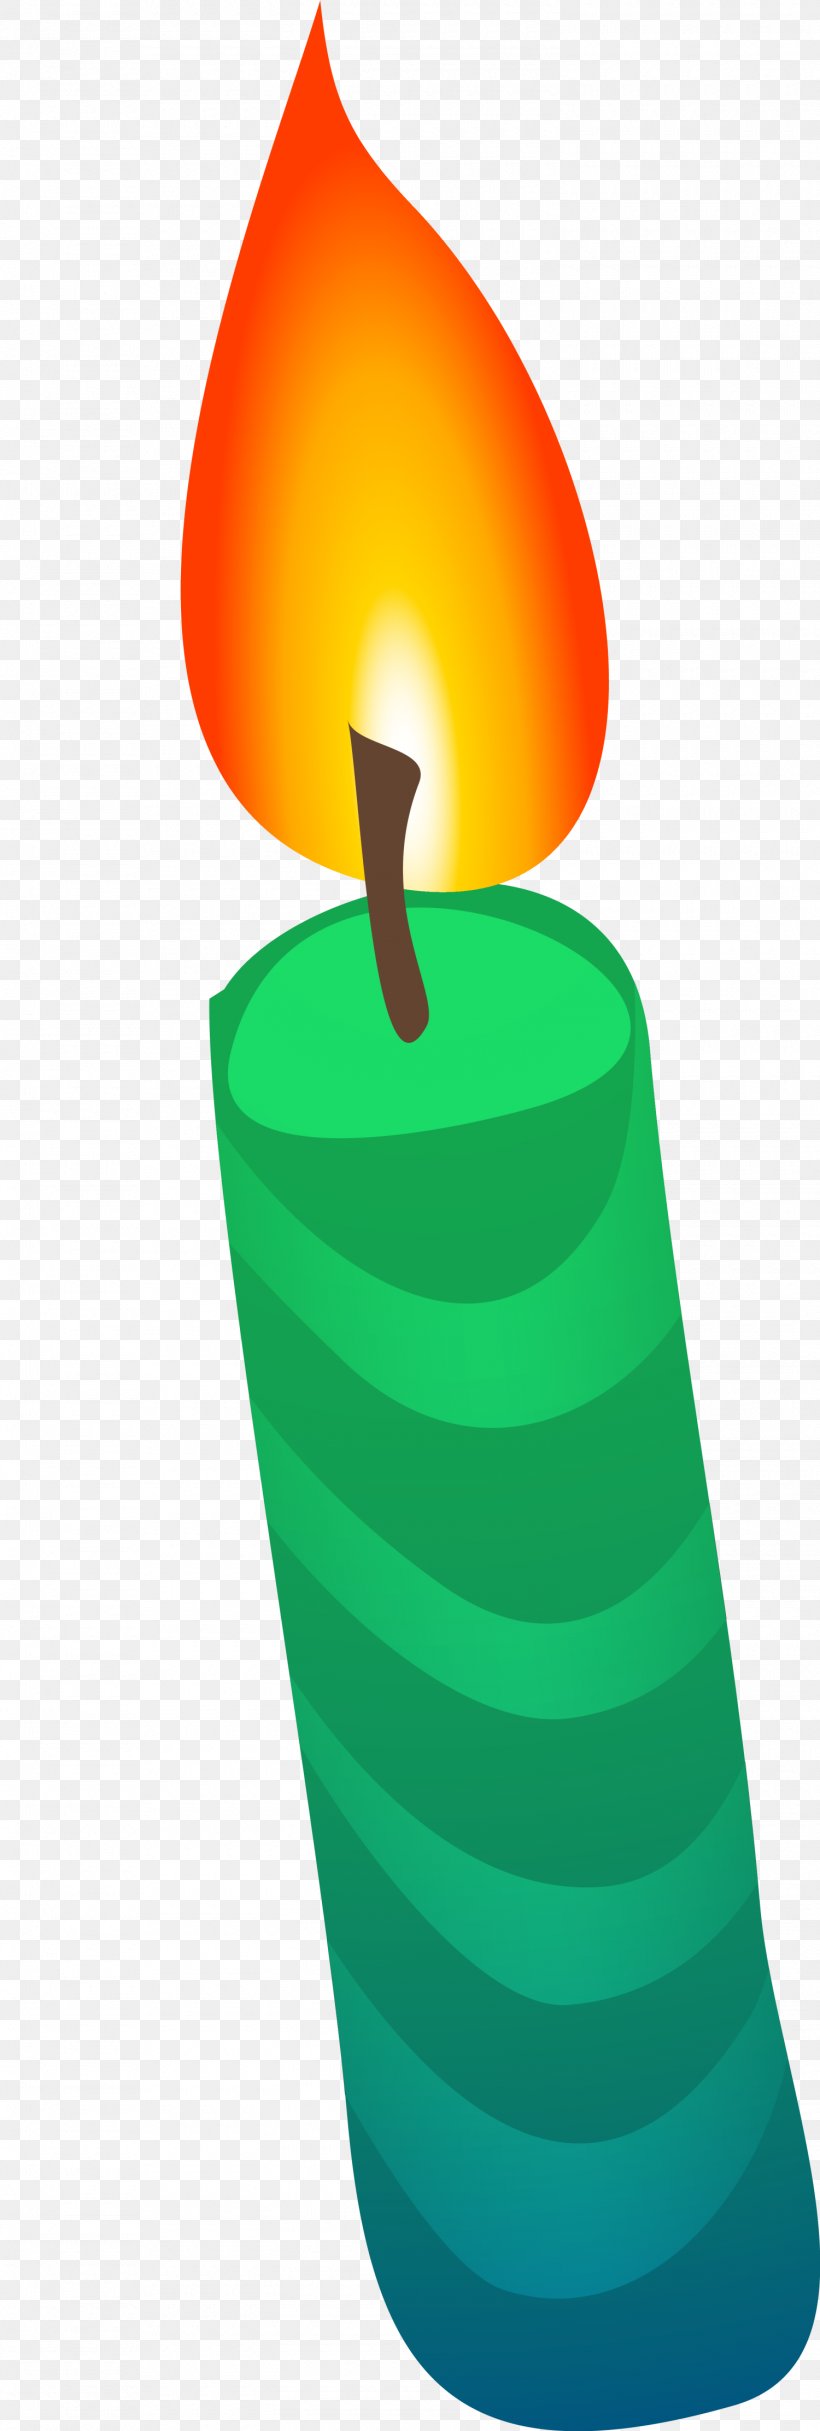 Candlestick Clip Art, PNG, 1500x4447px, Candle, Birthday, Cake, Candlestick, Green Download Free